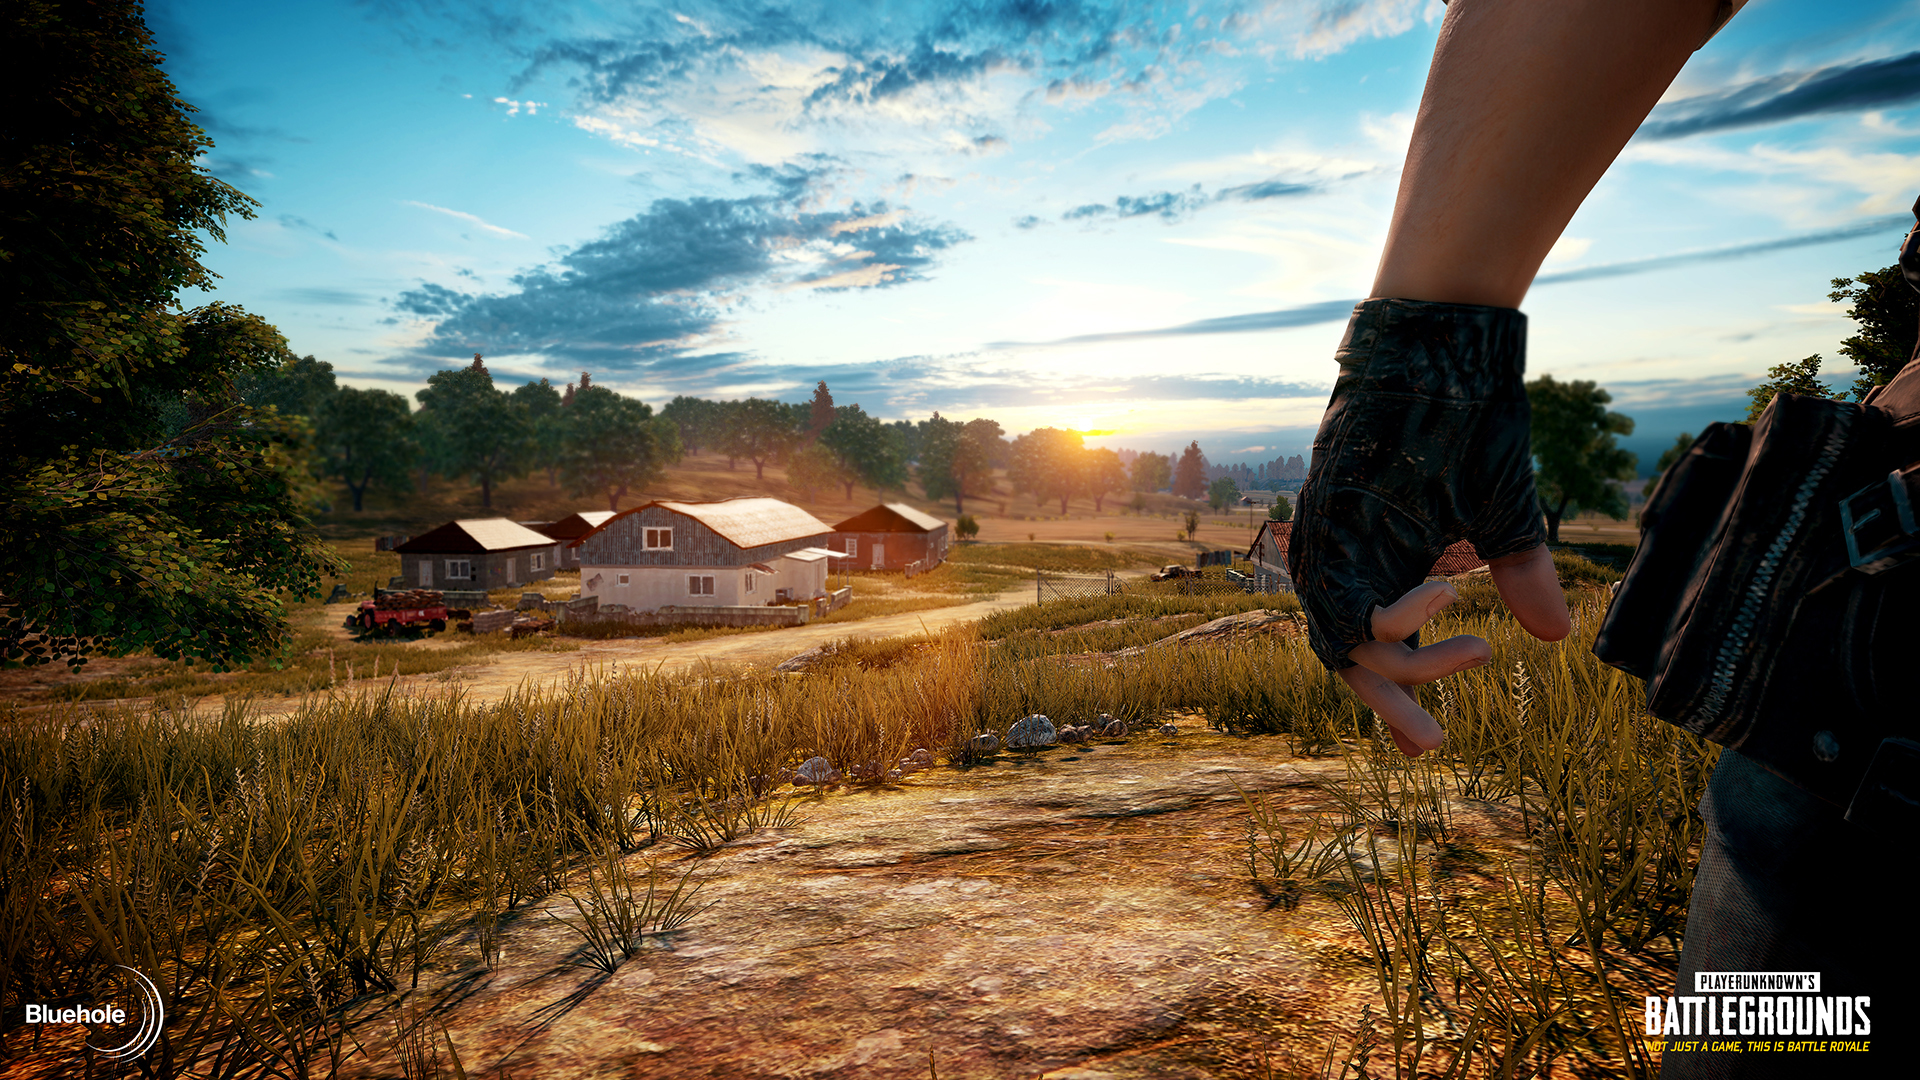 PLAYERUNKNOWNS BATTLEGROUNDS Changes To Scheduled Patch Rollouts